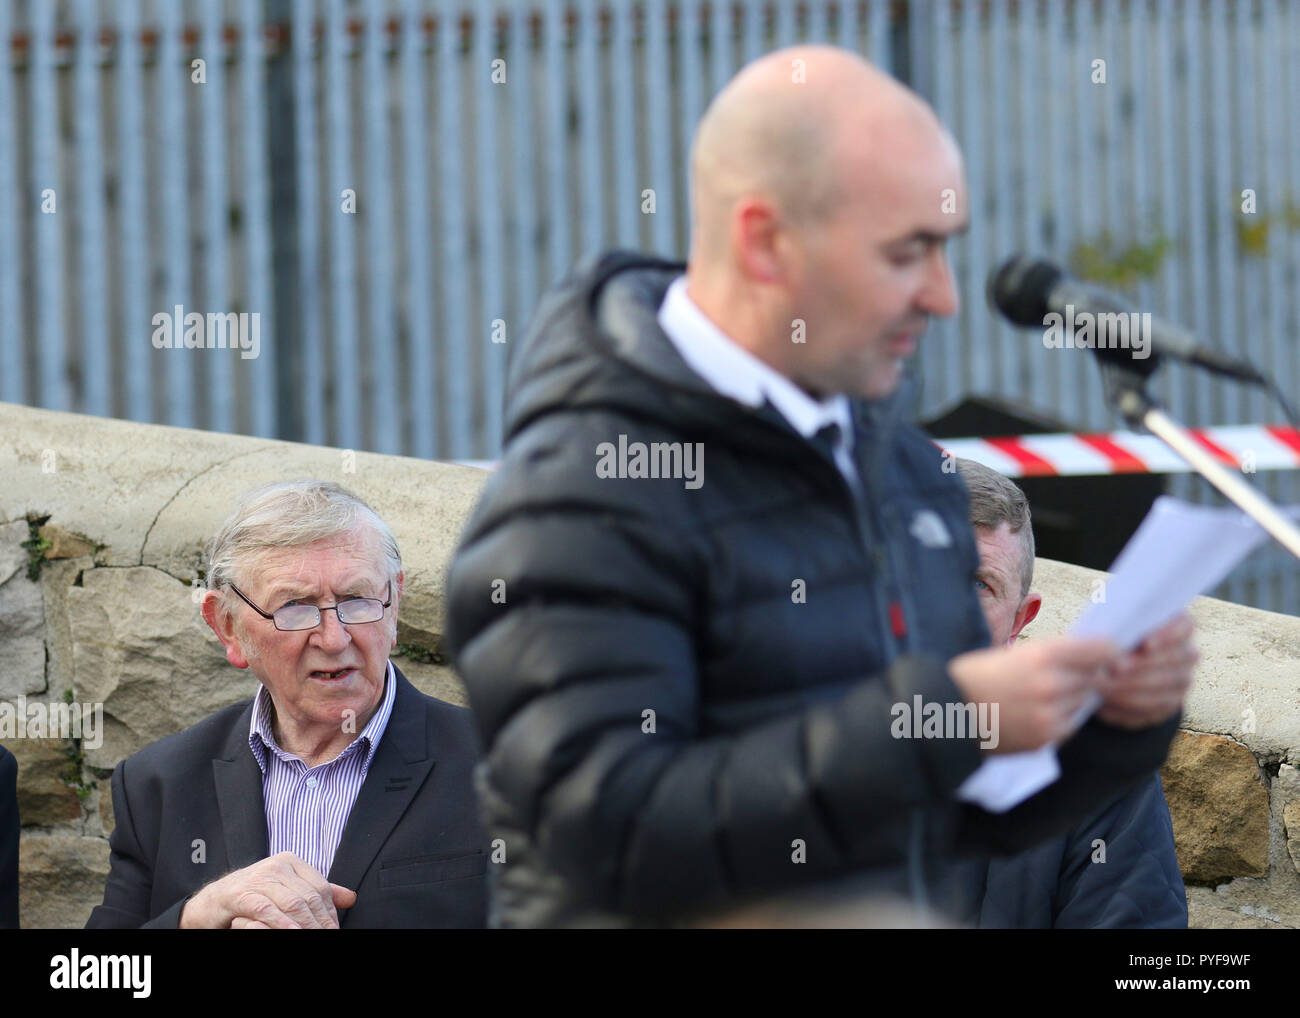 Billy Begley the father of Shankill bomber Thomas Begley listens to former PIRA member Sean Kelly, right, speak at Milltown Cemetery in West Belfast, as Hundreds of people from across the communities of Northern Ireland have come together for a church service to mark the 25th anniversary of the Shankill bomb. Stock Photo